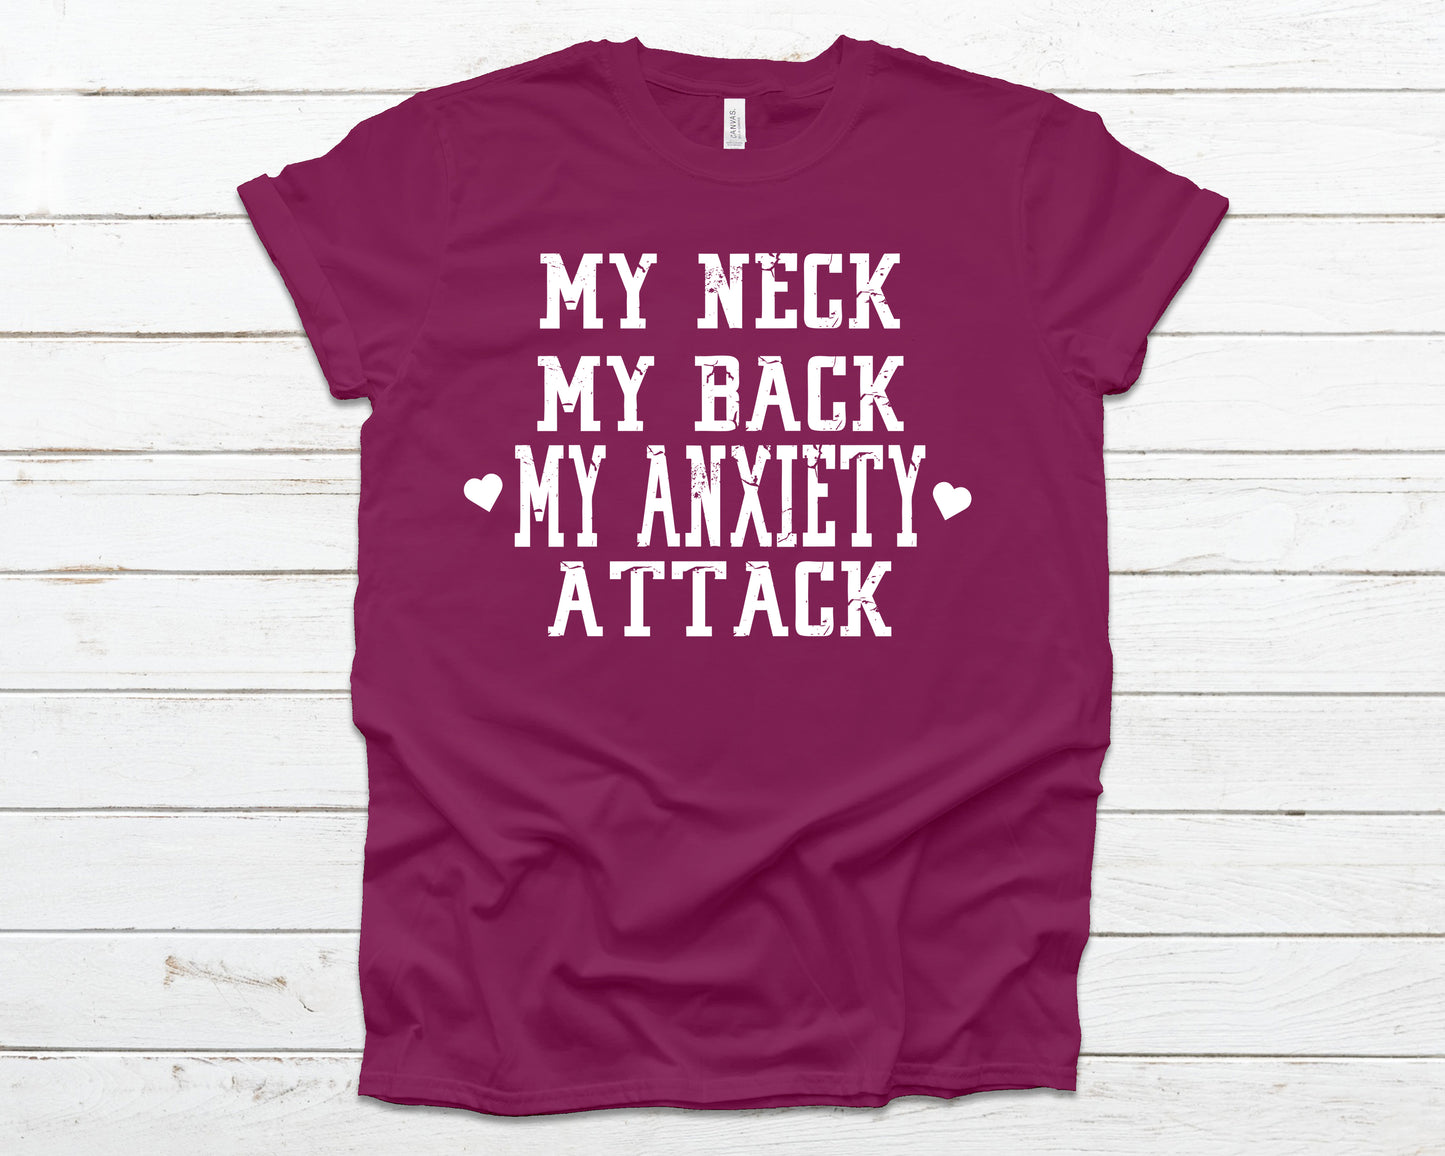 My neck my back my anxiety attack